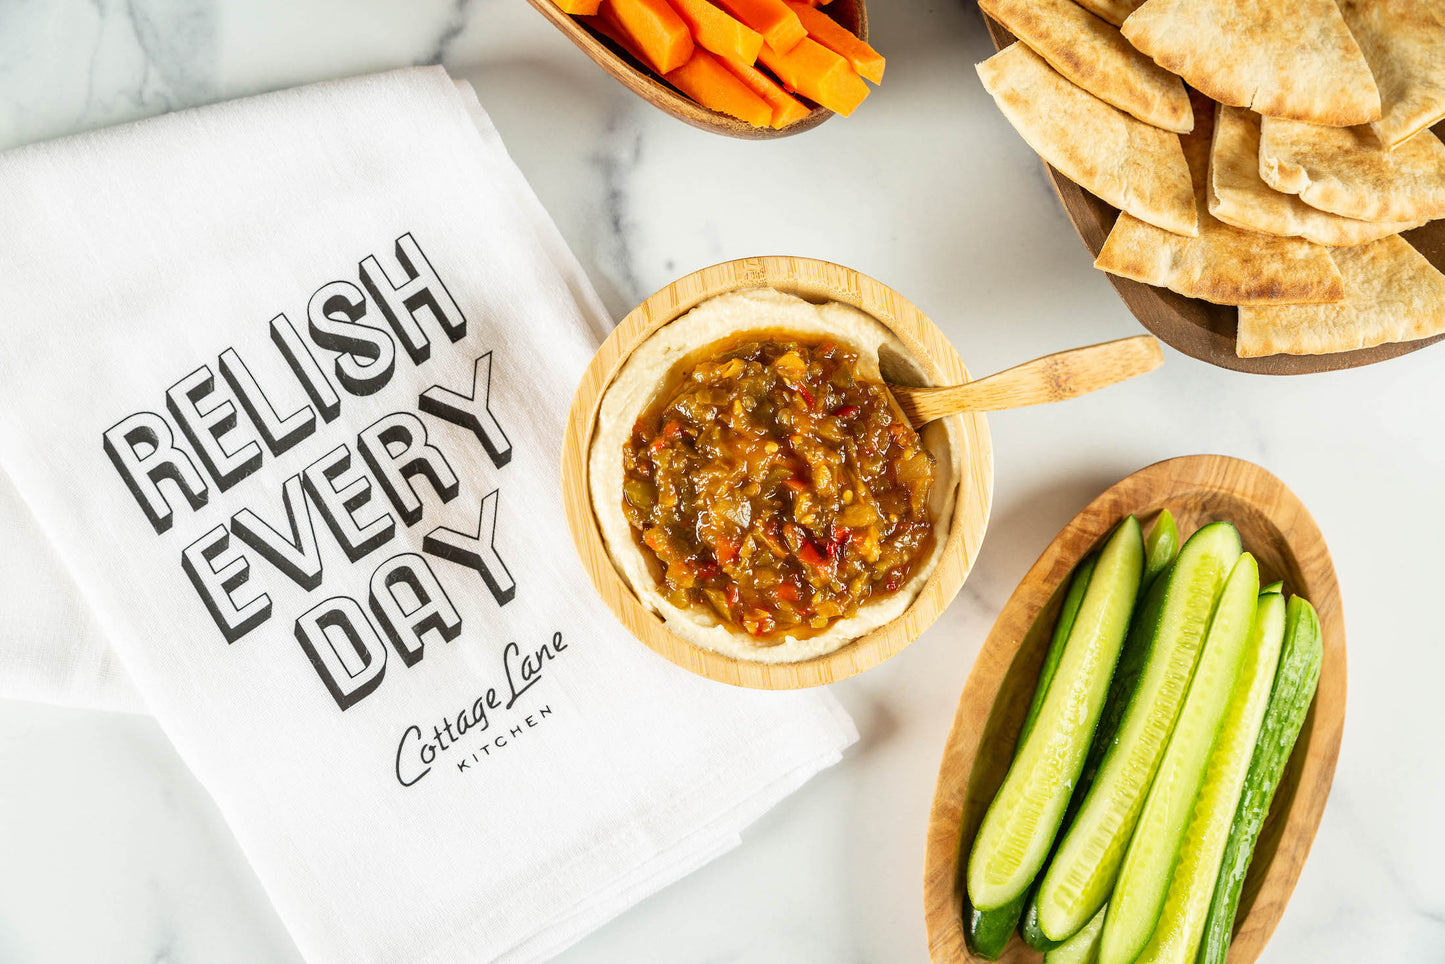 Get Me A Switch Spicy Pepper Relish on Hummus with a dish towel that reads Relish Every Day Cottage Lane Kitchen